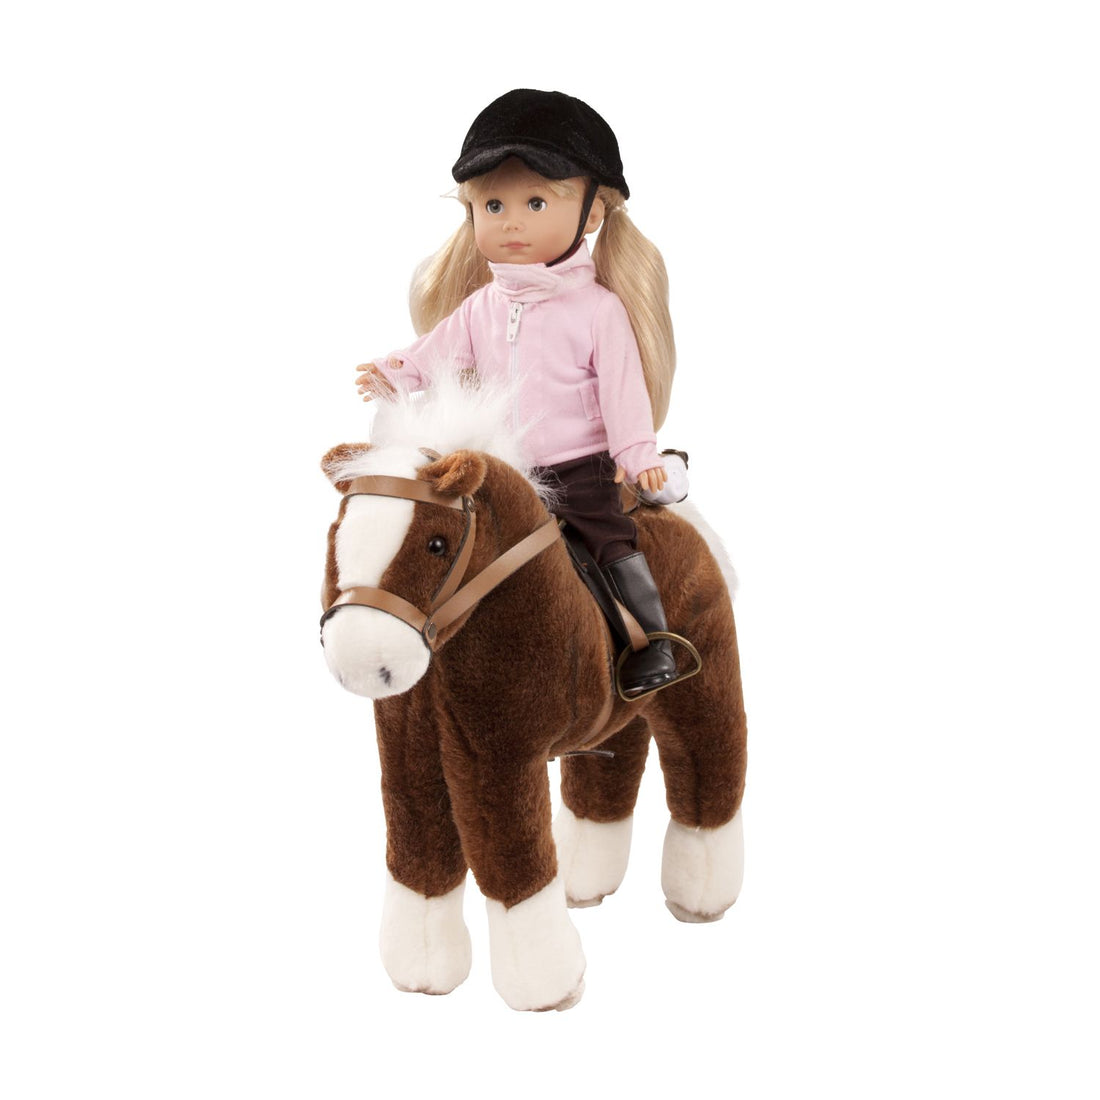 Show Jumping Tournament Winner - Dolls and Accessories